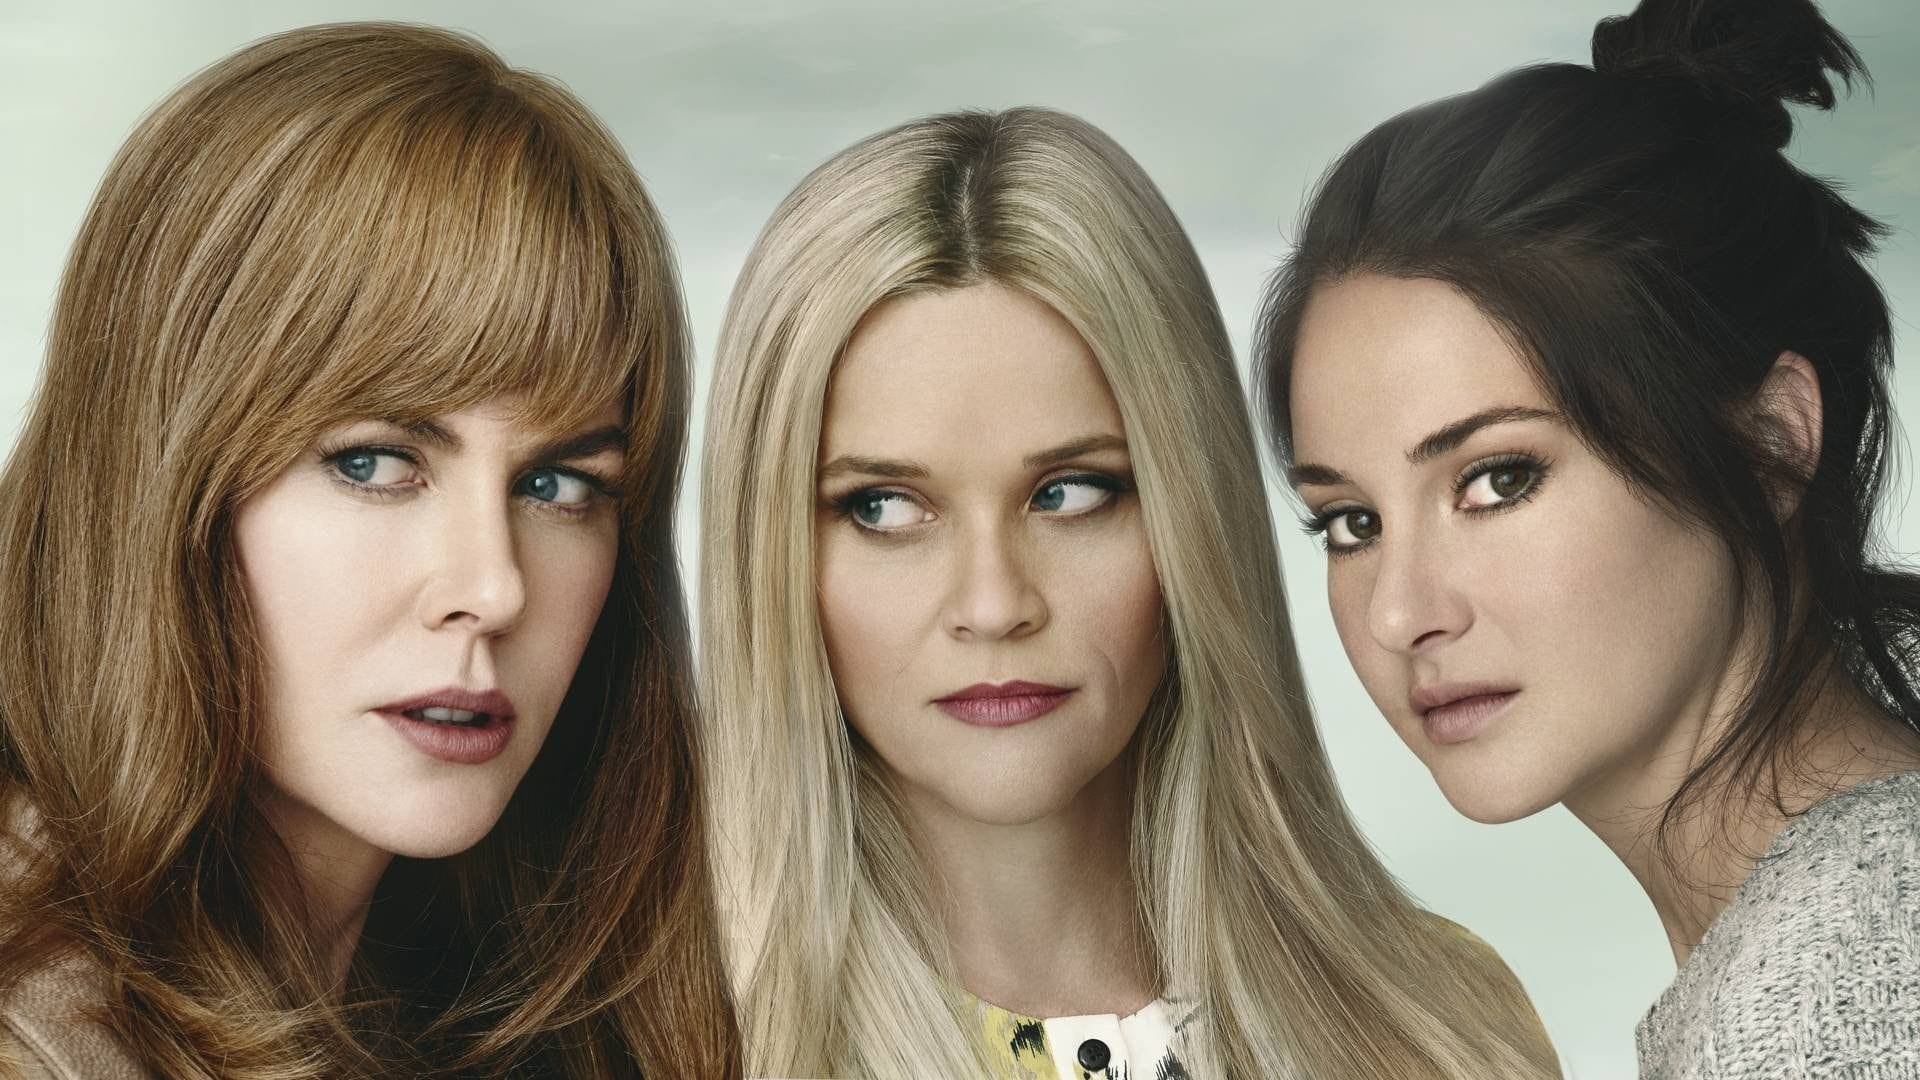 HBO has announced that 'Big Little Lies' will return for S2. It’s time to hustle in like a Monterey meeting of moms and discuss it all in depth.